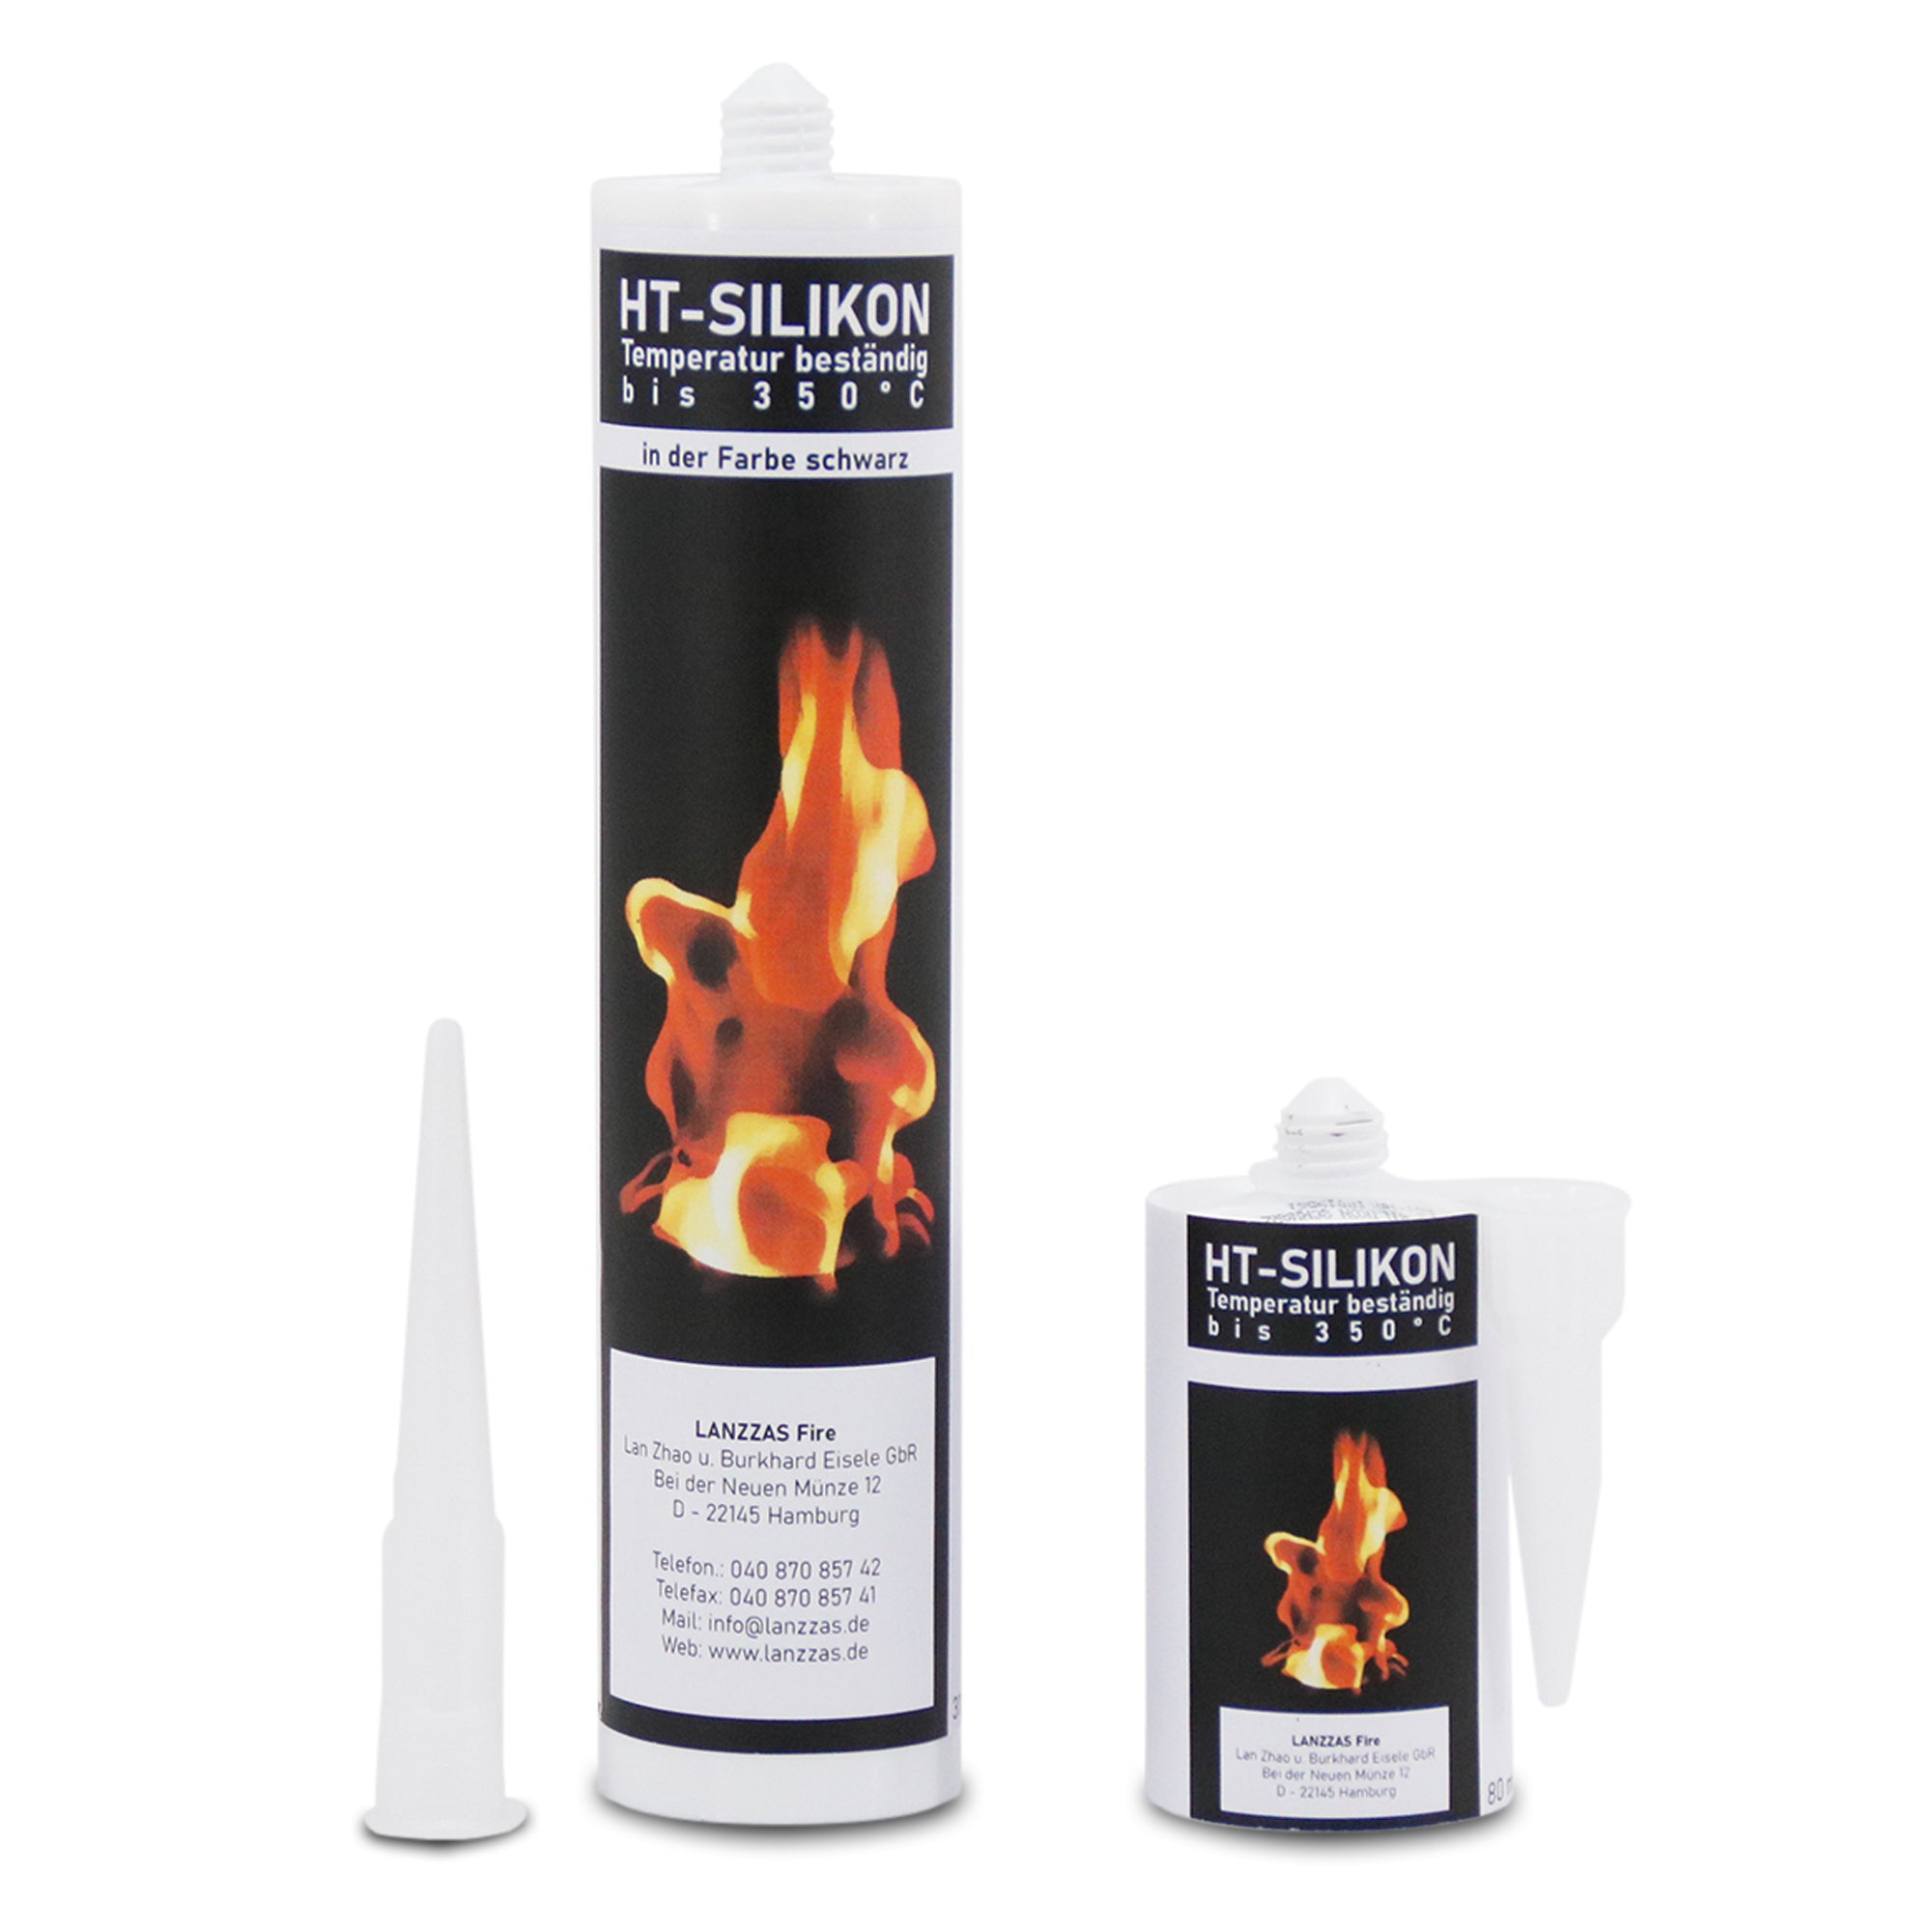 Silicone - high temperature up to 350°C 310ml / 80ml